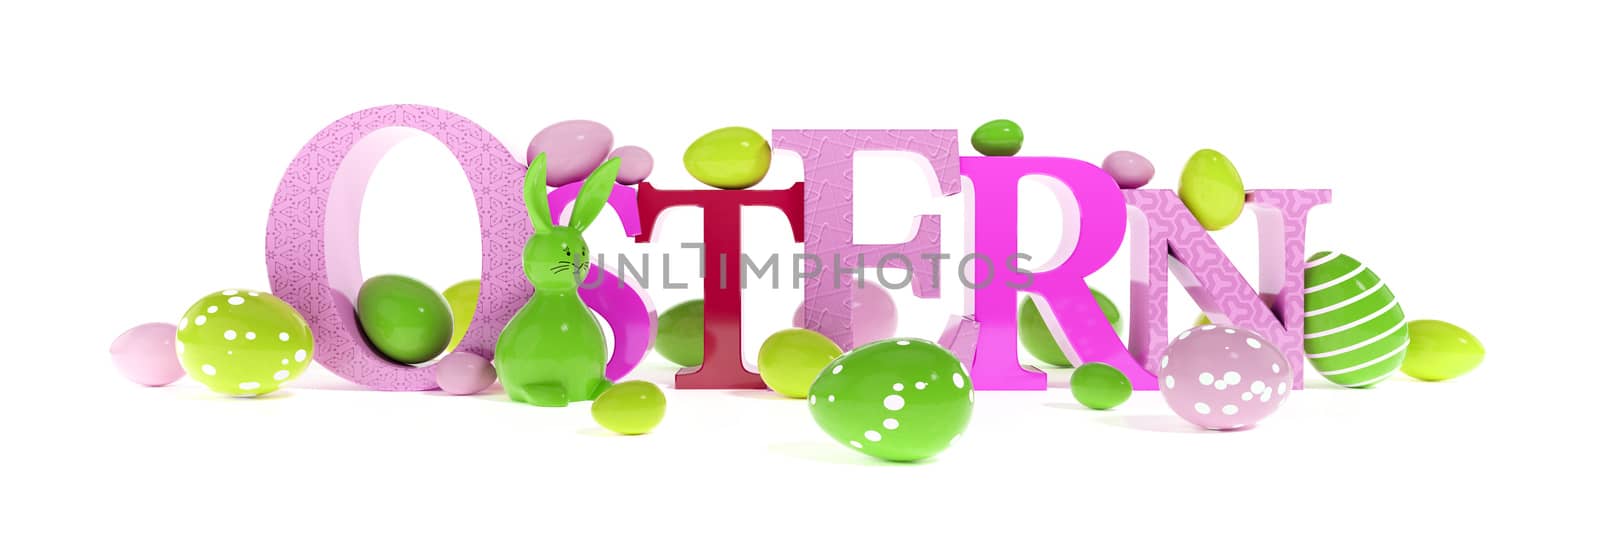 3d illustration of the word easter in german language